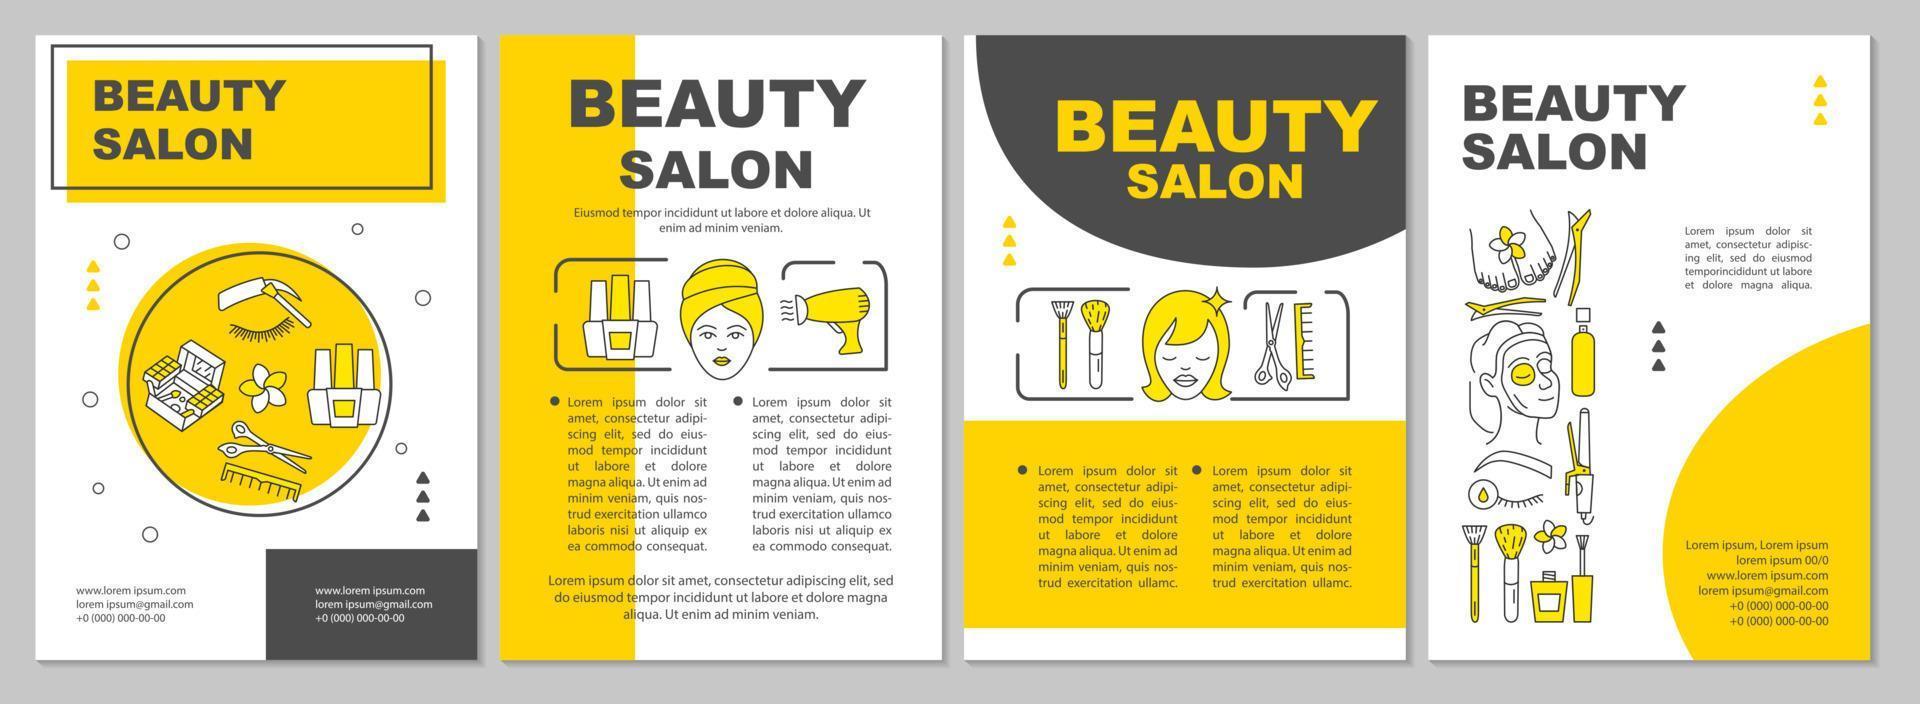 Beauty salon brochure template layout. Cosmetology procedure, SPA. Flyer, booklet, leaflet print design with linear illustrations. Vector page layout for magazines, annual reports, advertising posters